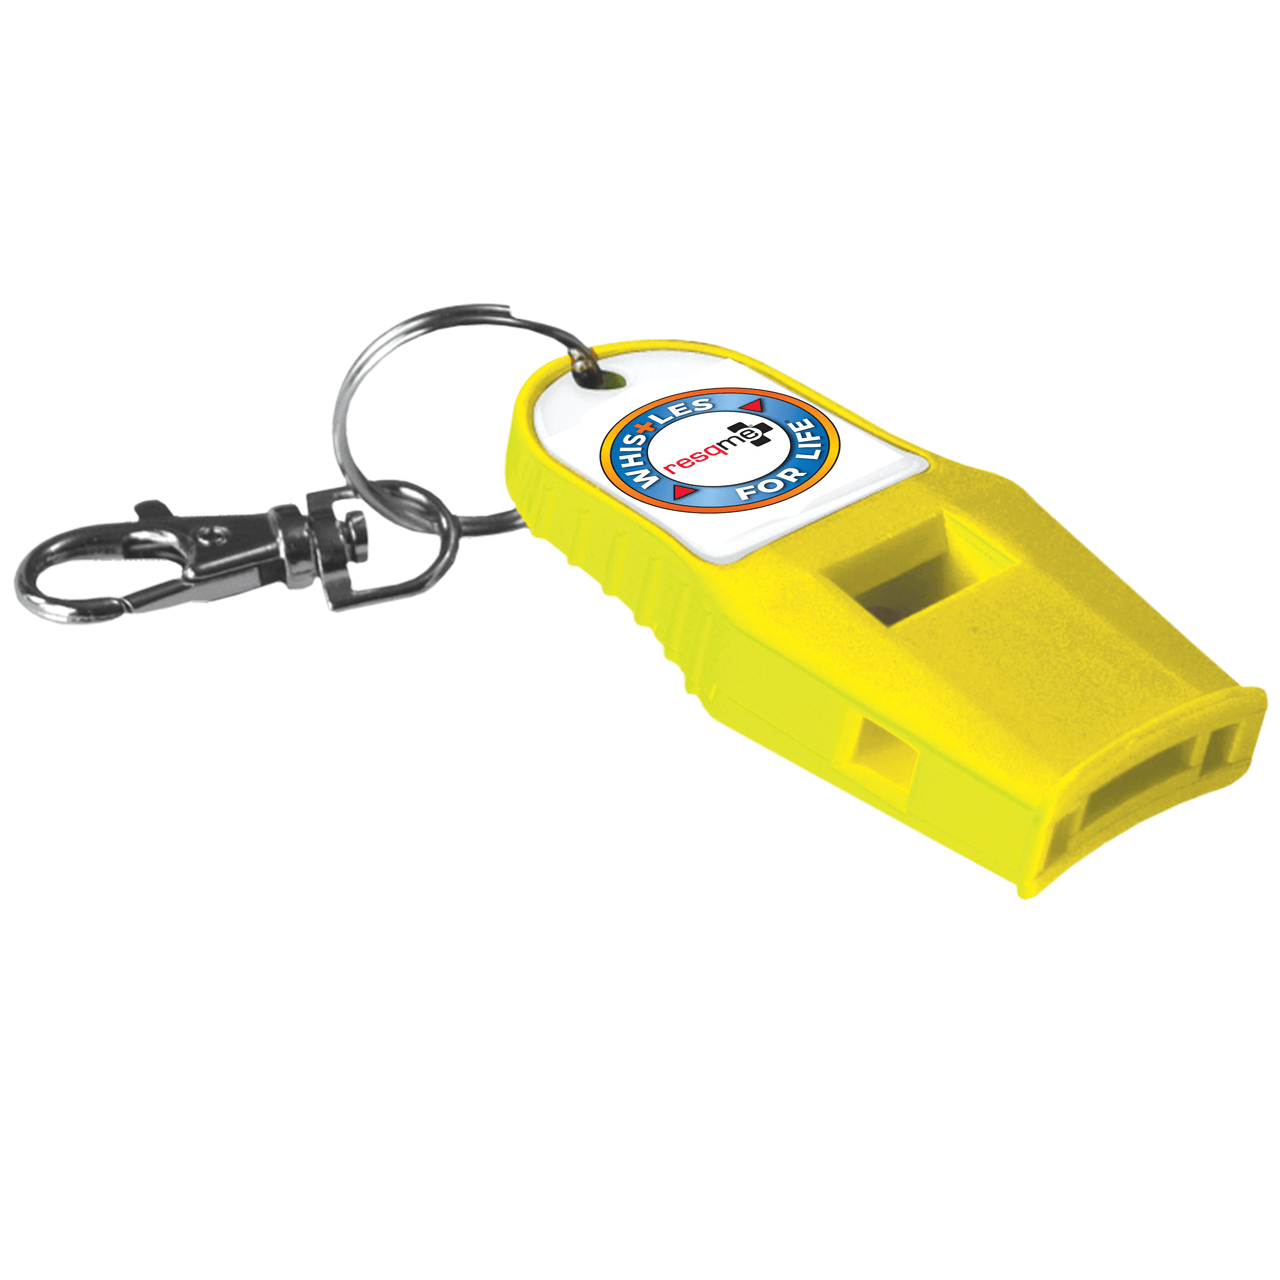 Paramedic Shop Resqme Inc Tools Yellow Whistle for Life - Safety Whistle